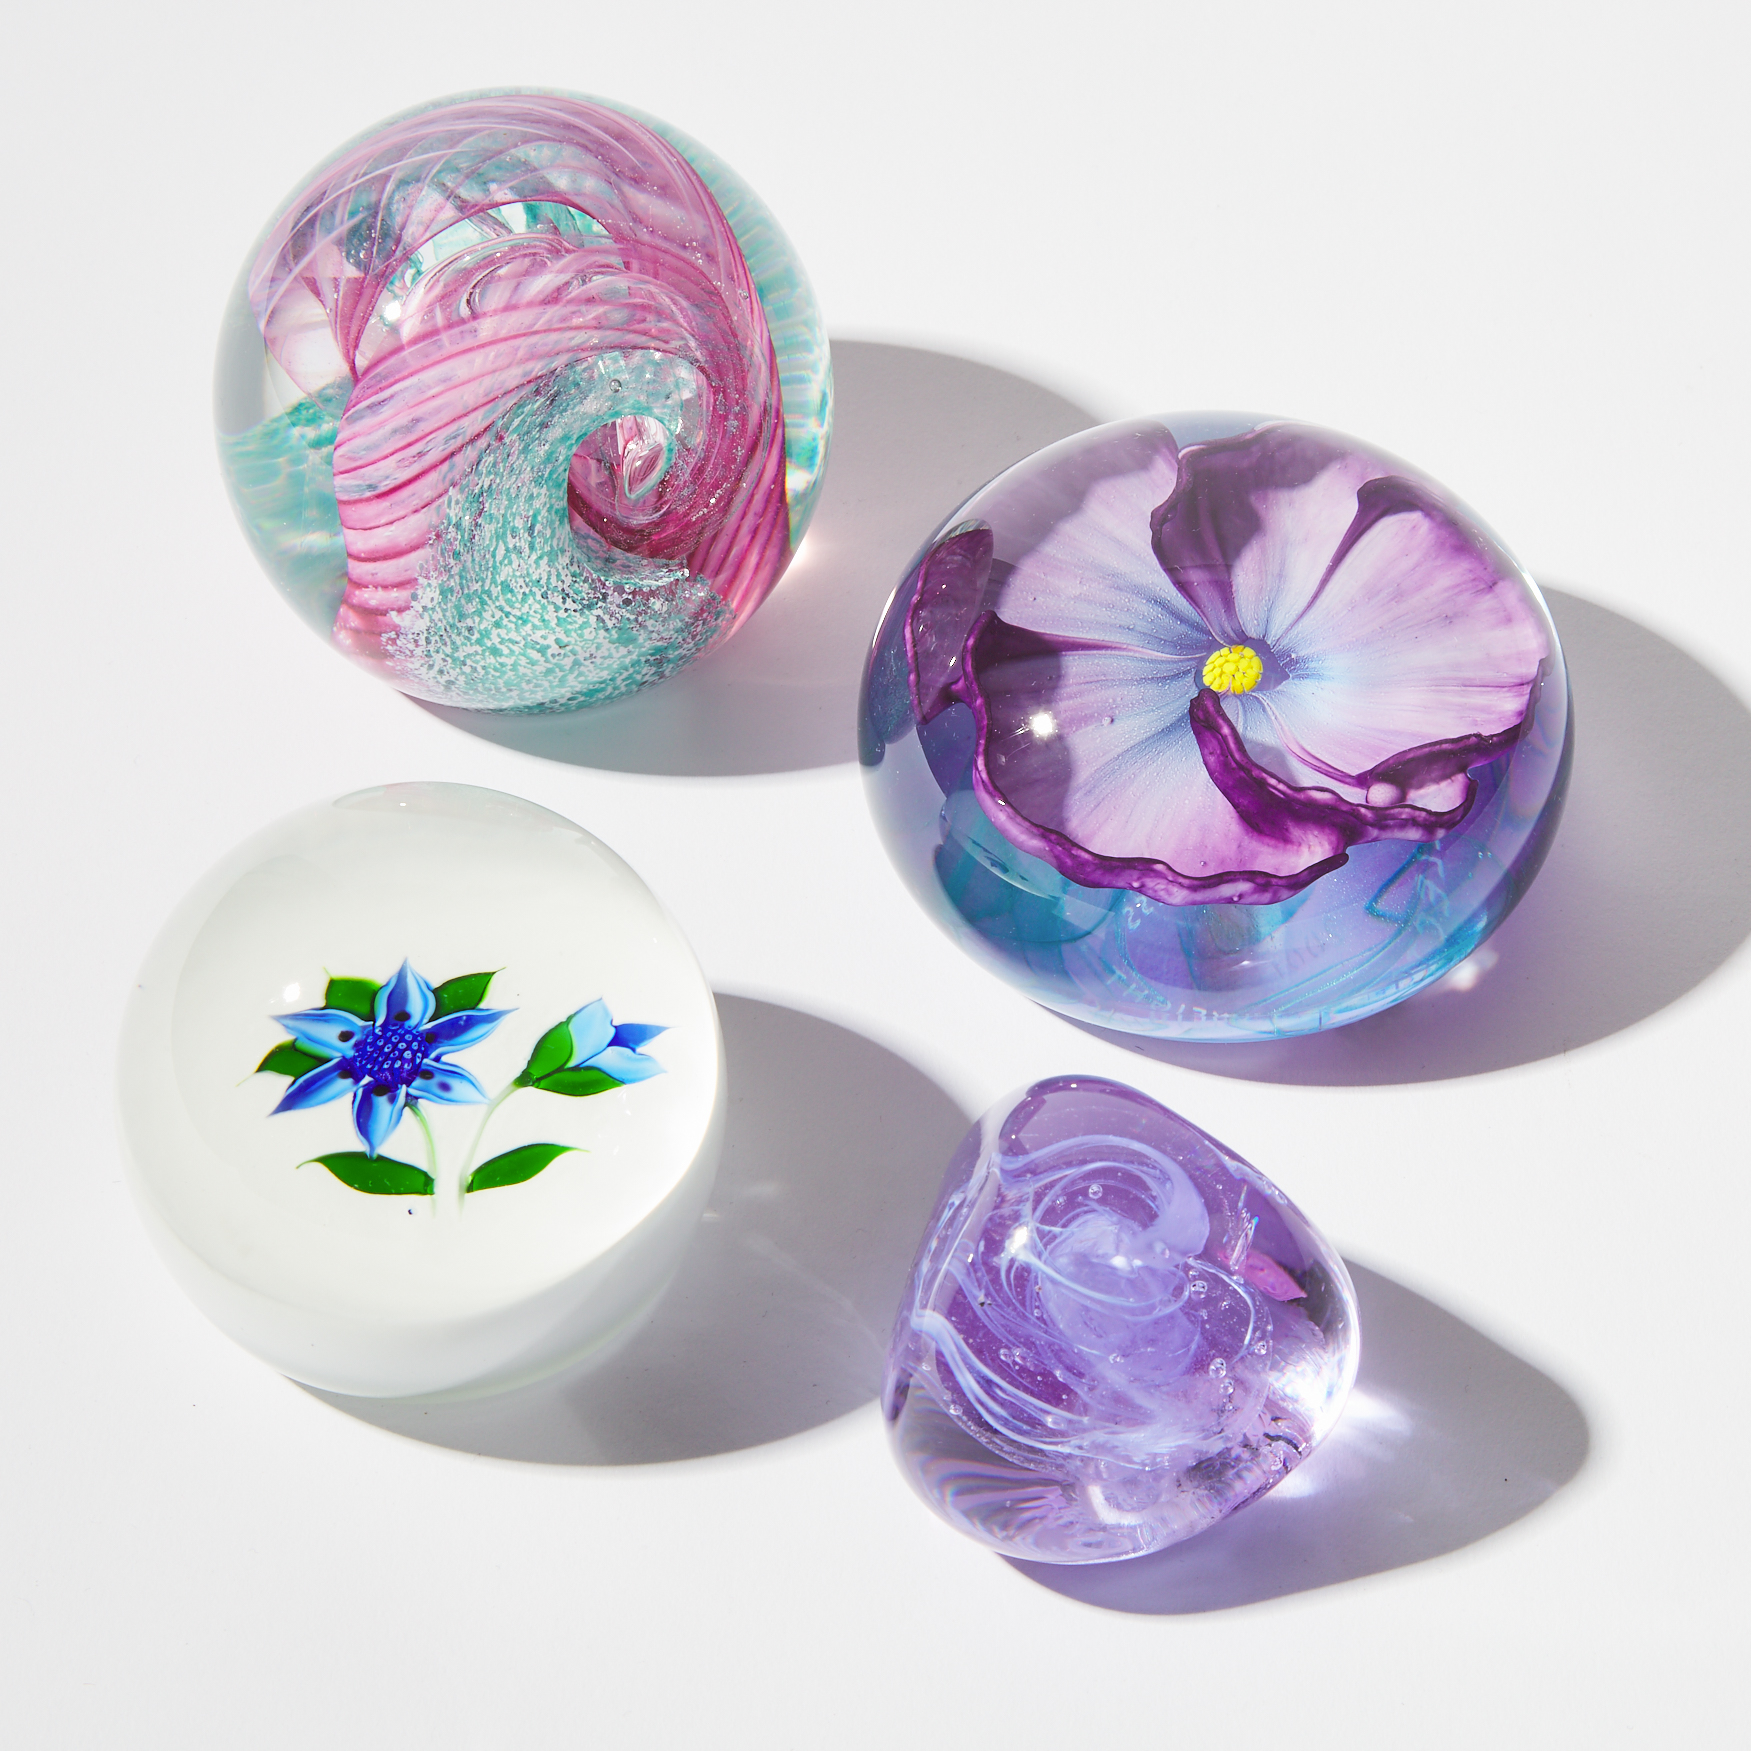 Four Caithness Glass Paperweights, c.1990-2000